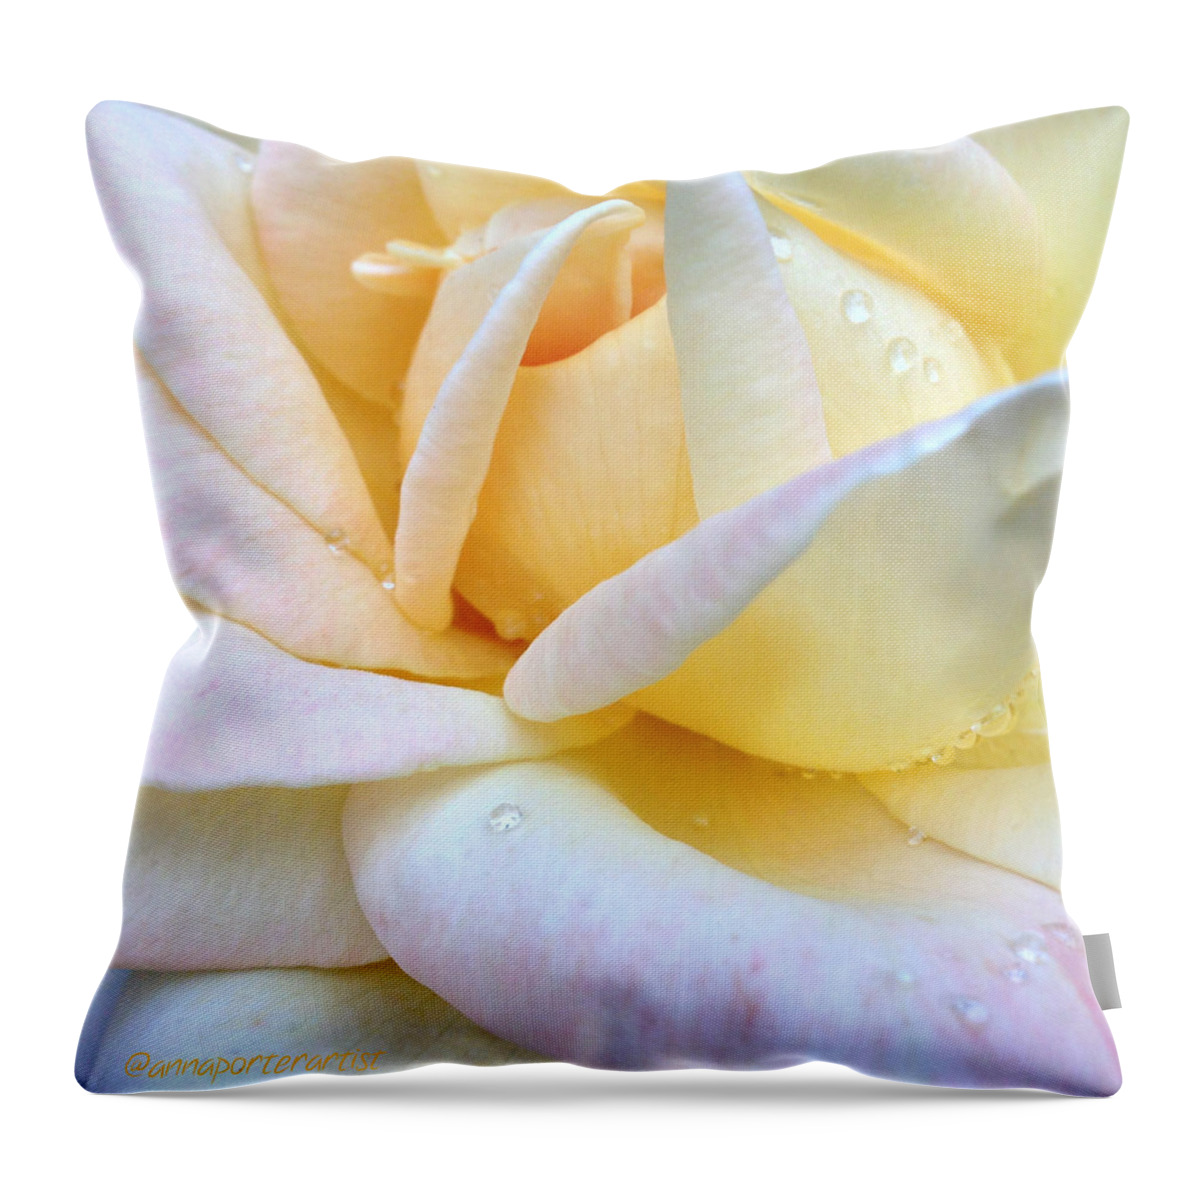 Morning Dew On A Pale Yellow Rose Throw Pillow For Sale By Anna Porter